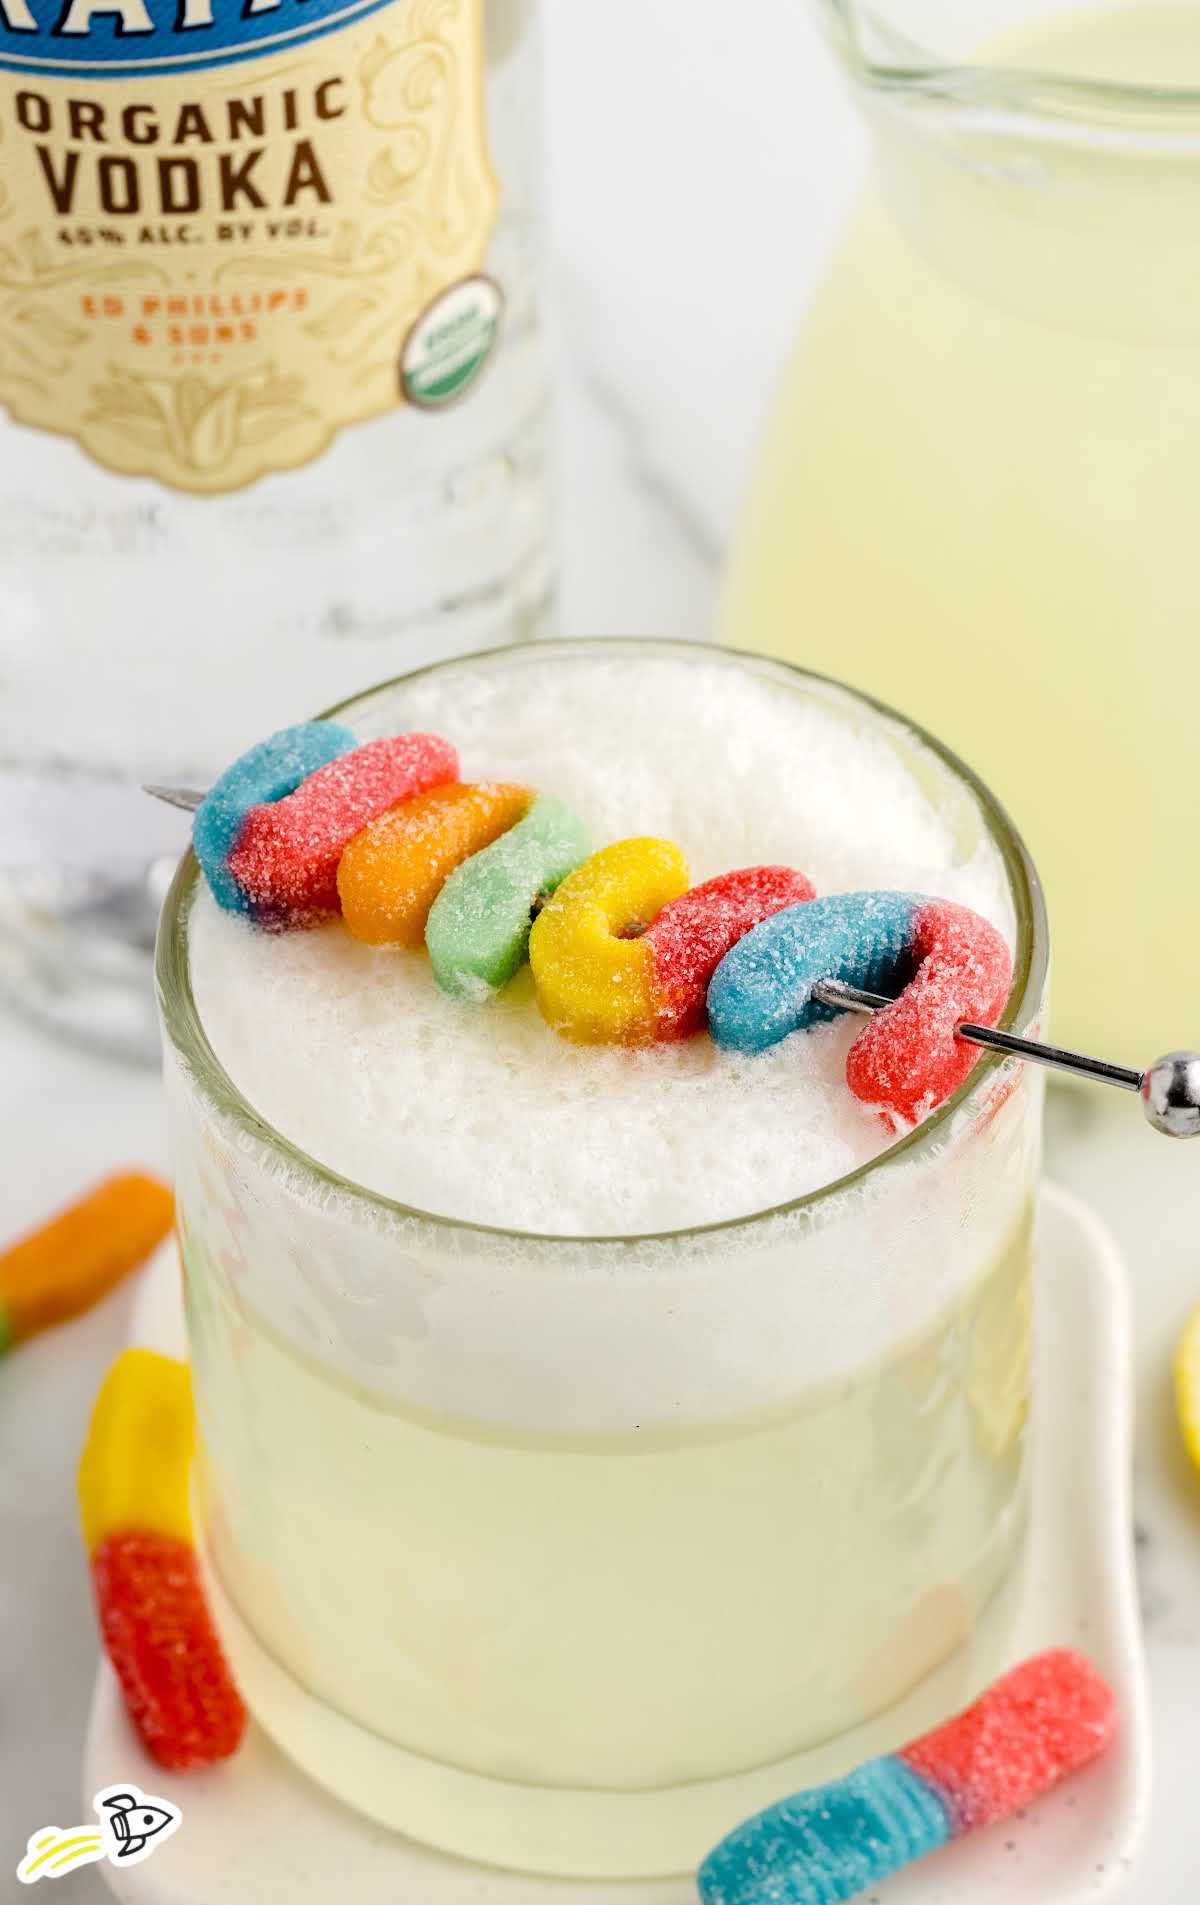 close up shot of a glass of vodka sour garnished with candies